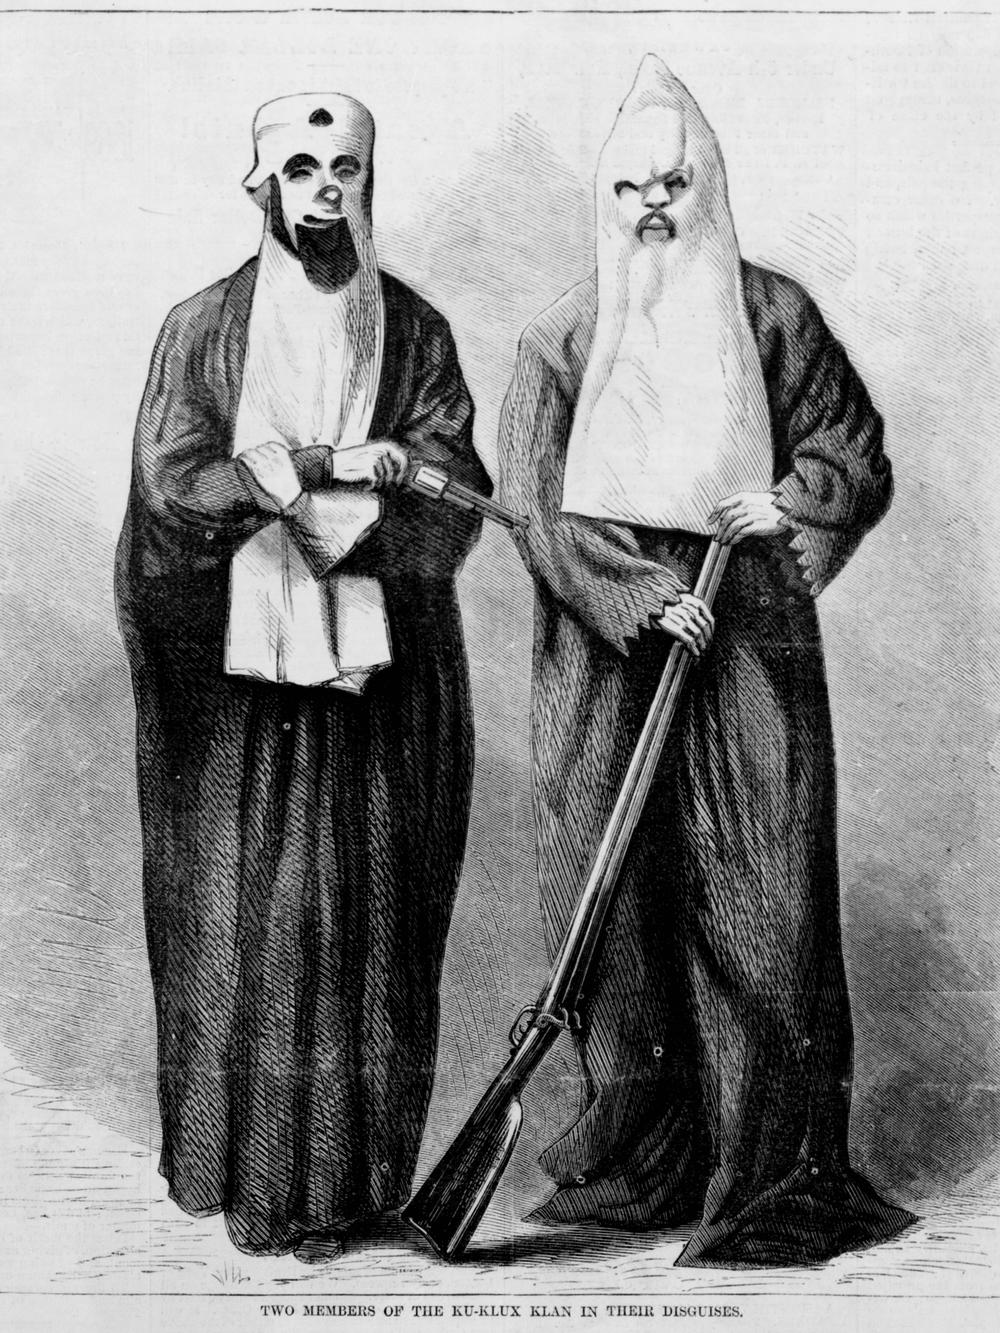 This drawing from 1868 depicts early members of the Ku Klux Klan. Historians have documented how the group used absurdity to mock its opponents and to try to mask the seriousness of the KKK's atrocities.